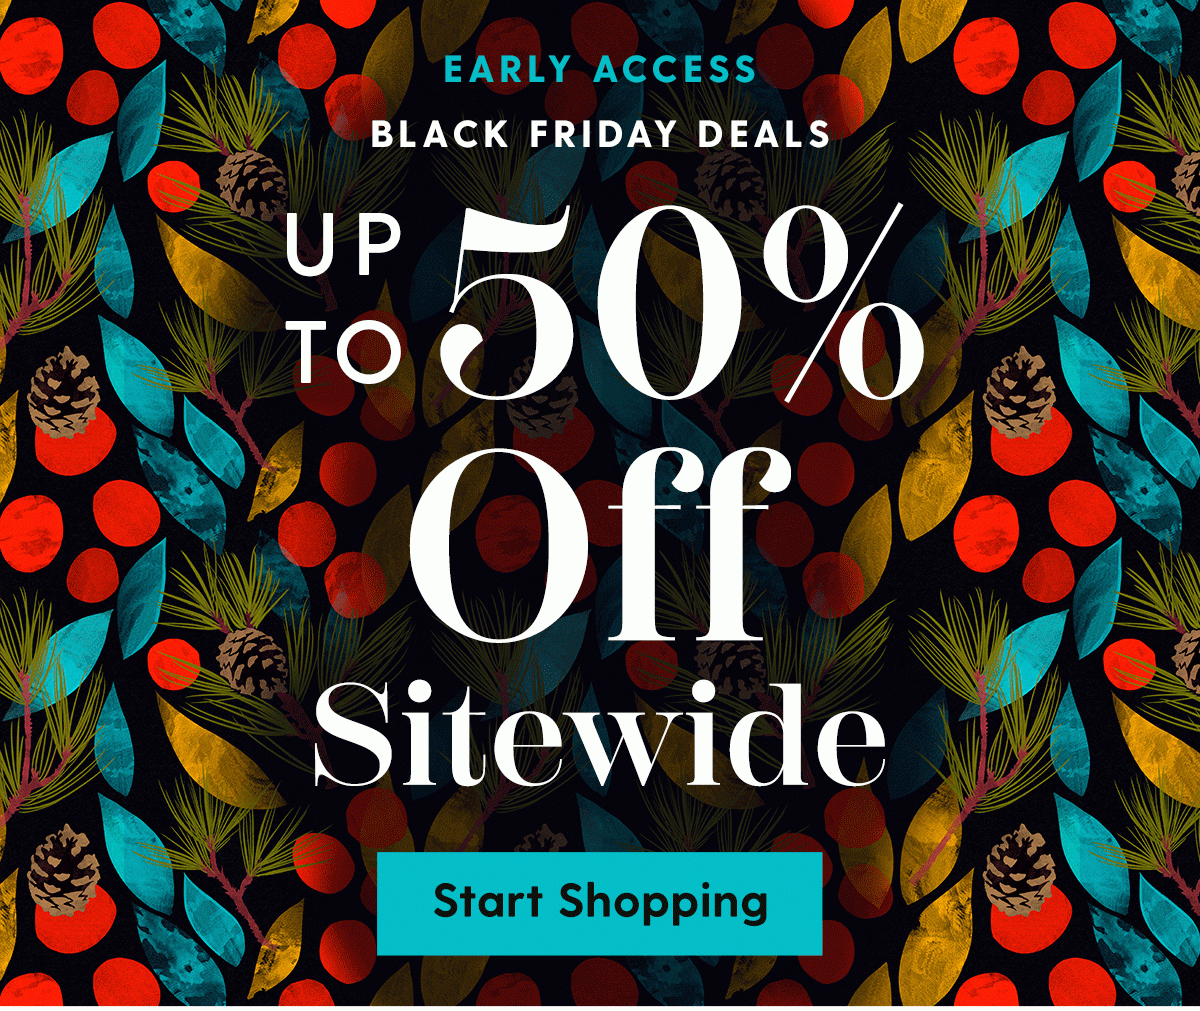 EARLY ACCESS Black Friday Deals | Up to 50% Off Sitewide | Start Shopping!